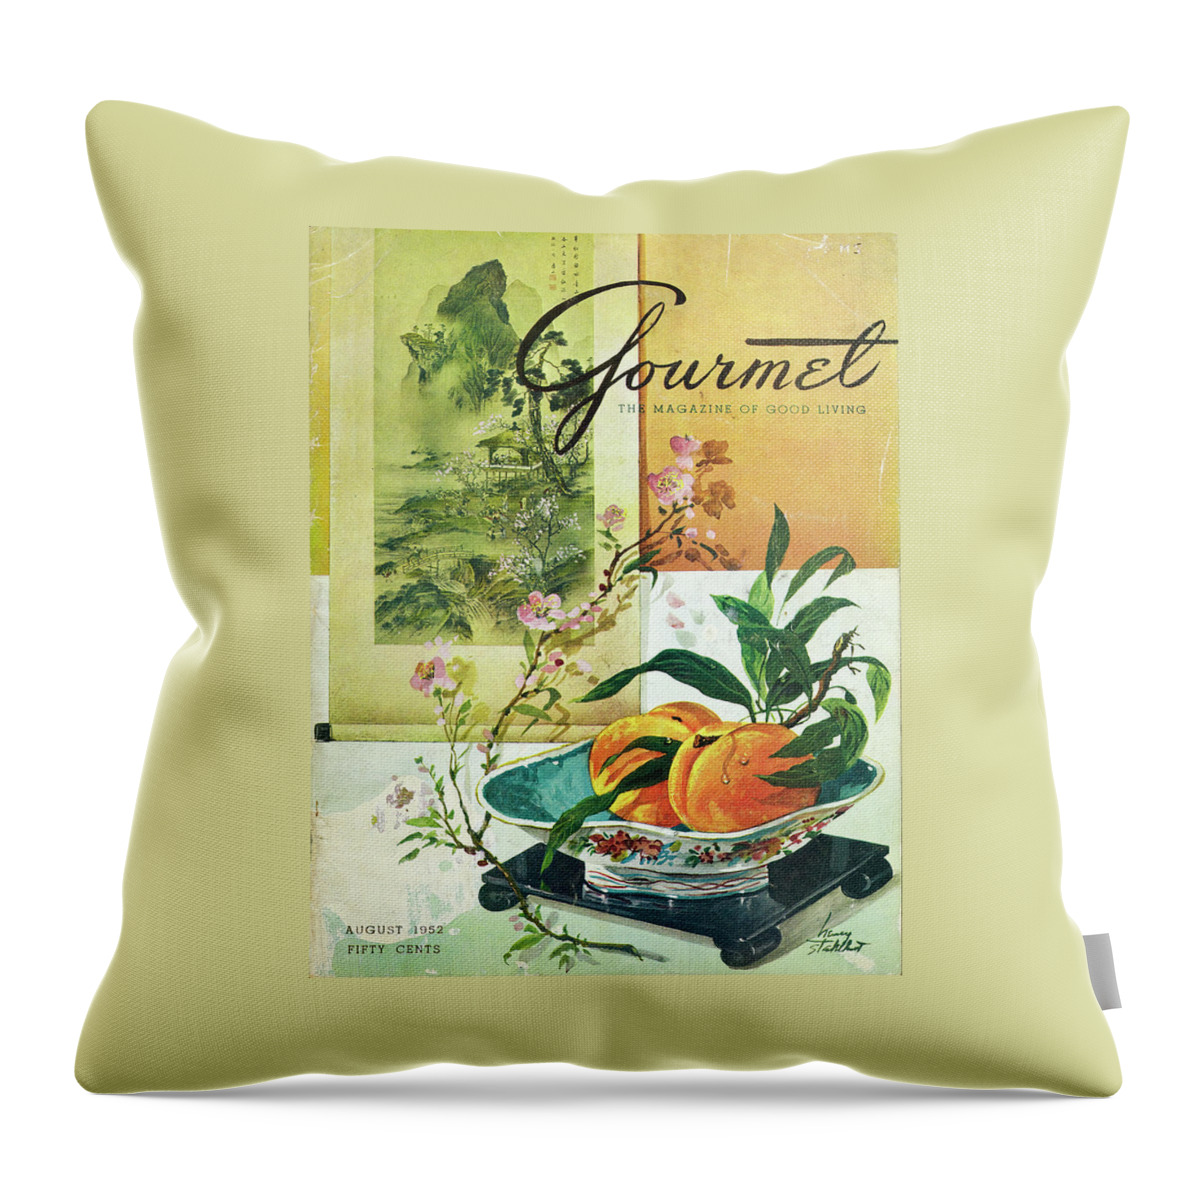 Gourmet Cover Featuring A Bowl Of Peaches Throw Pillow